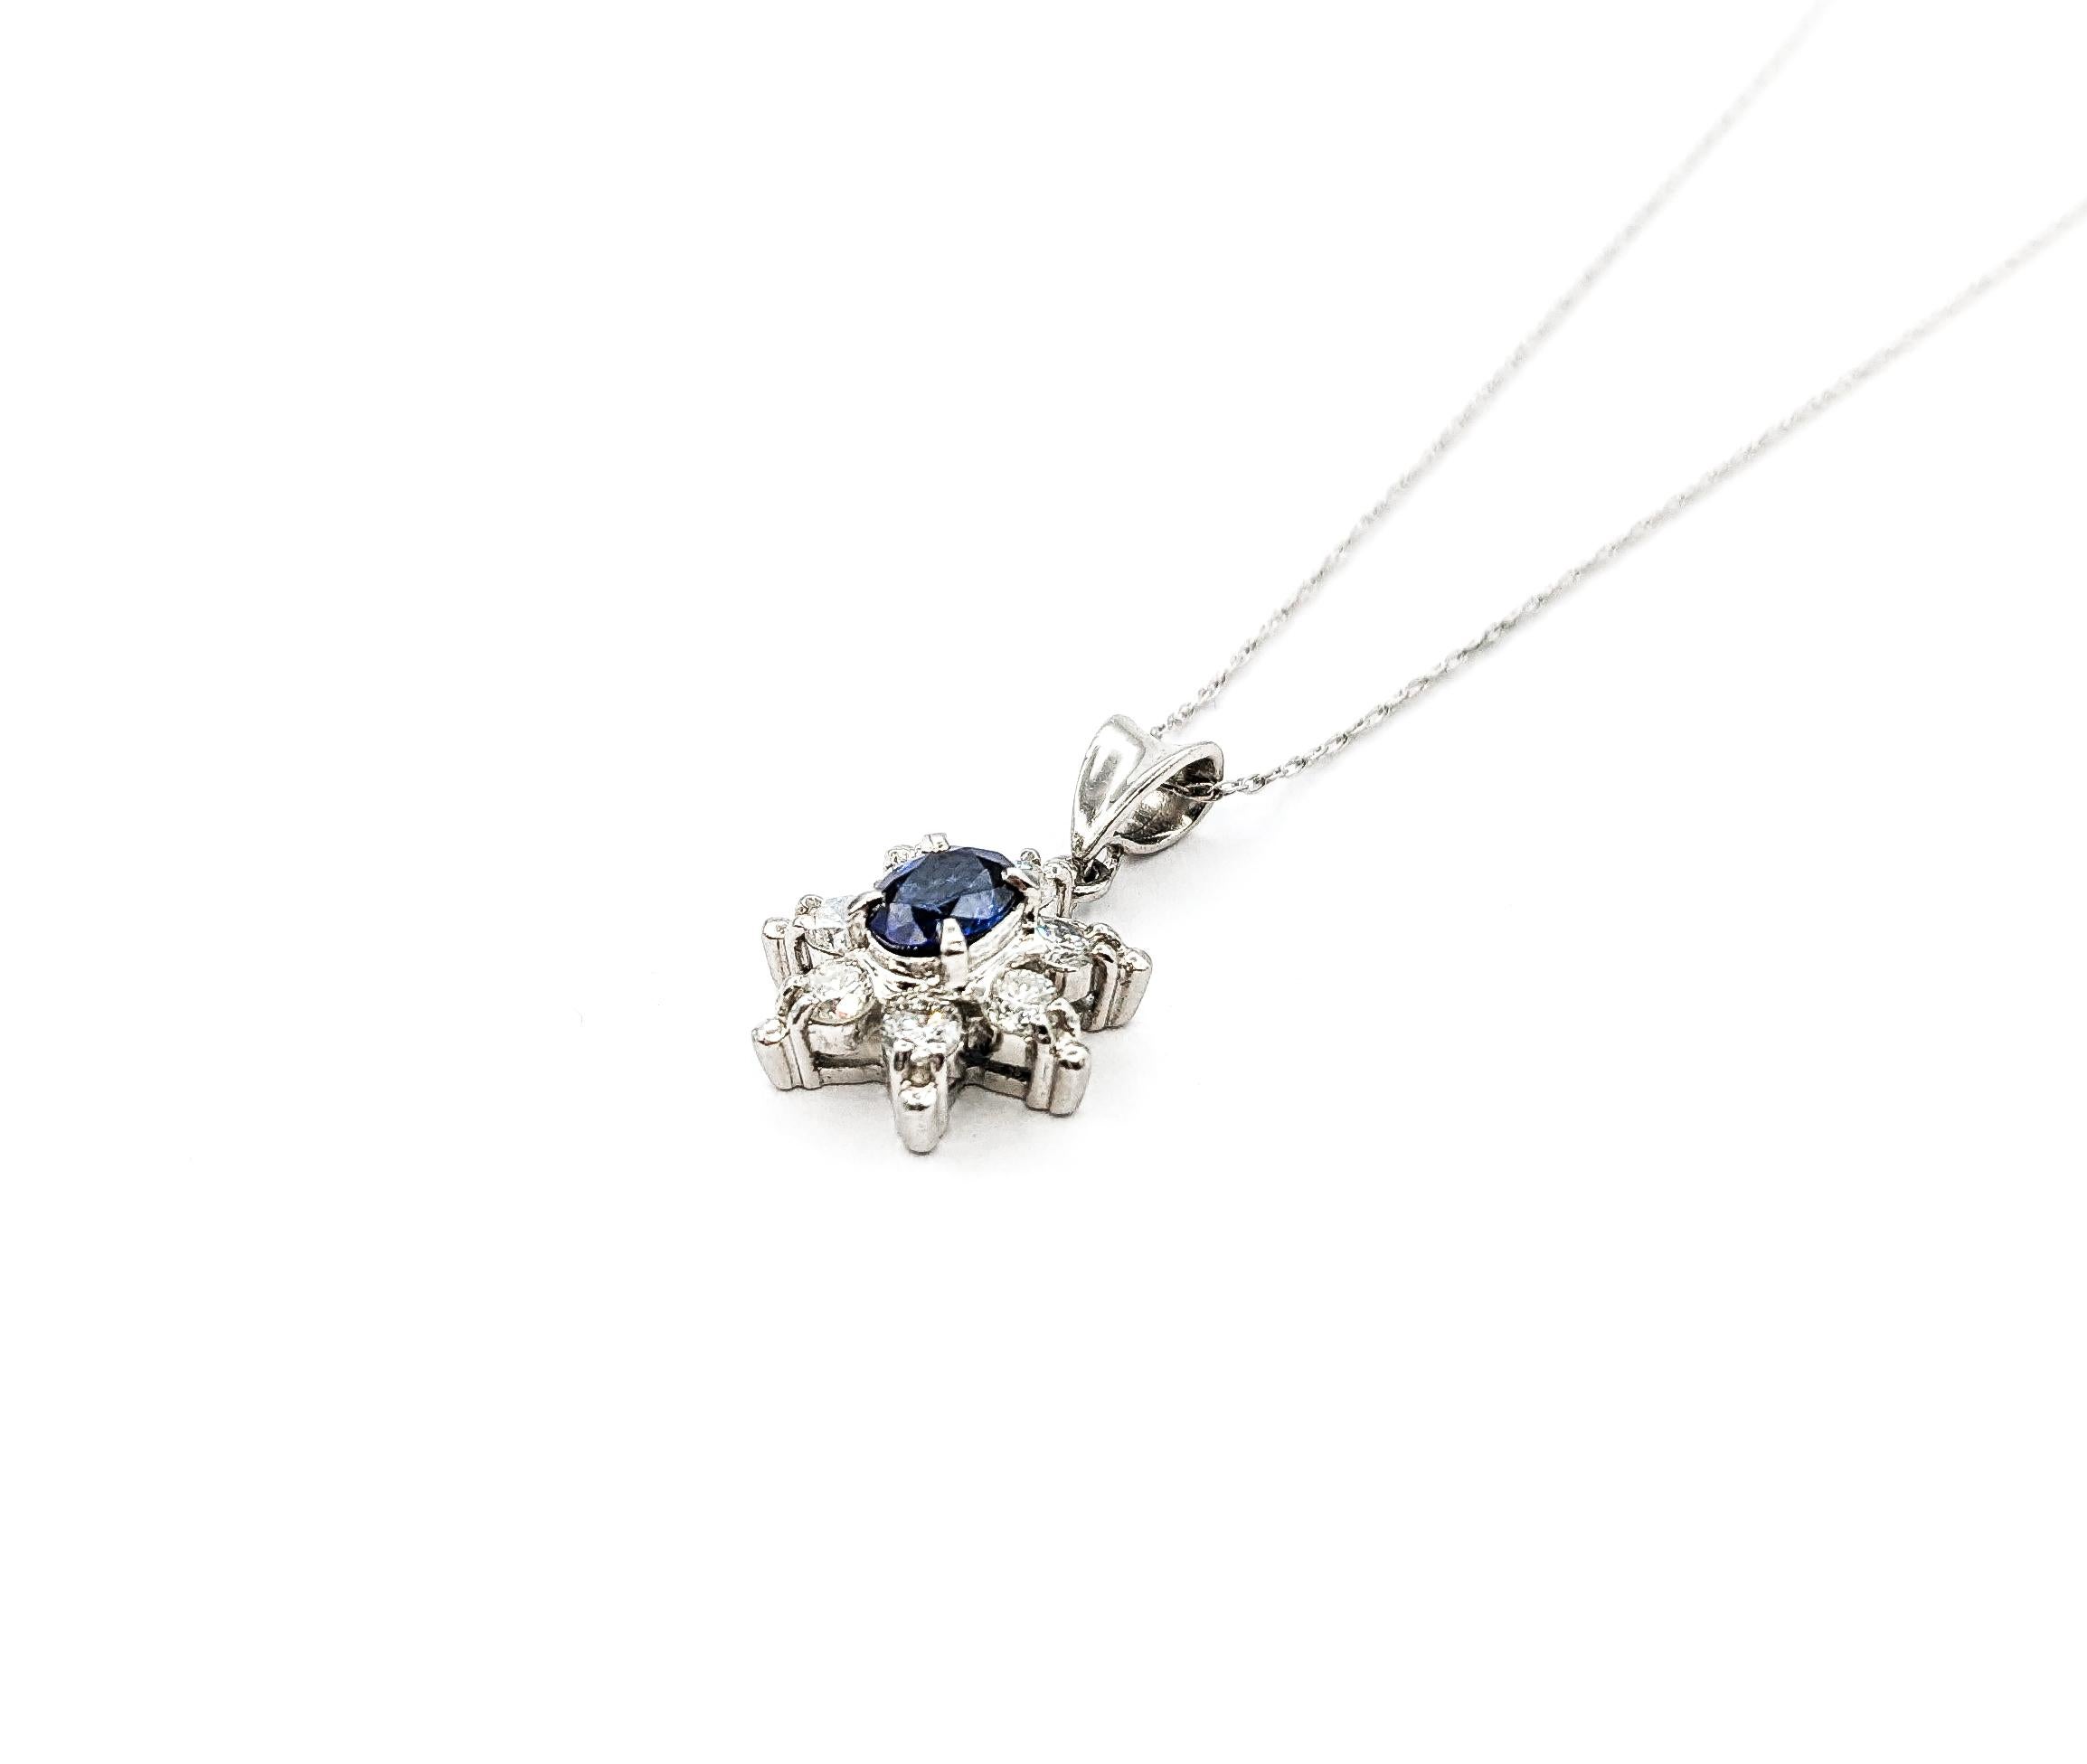 .44ct Blue Sapphire & .40ctw Diamond Pendant In Platinum W/Chain


Introducing an exquisite Gemstone Fashion Pendant meticulously crafted in 900pt platinum. This drop-type pendant is adorned with 0.40ctw of diamonds paired seamlessly with 0.44ctw of